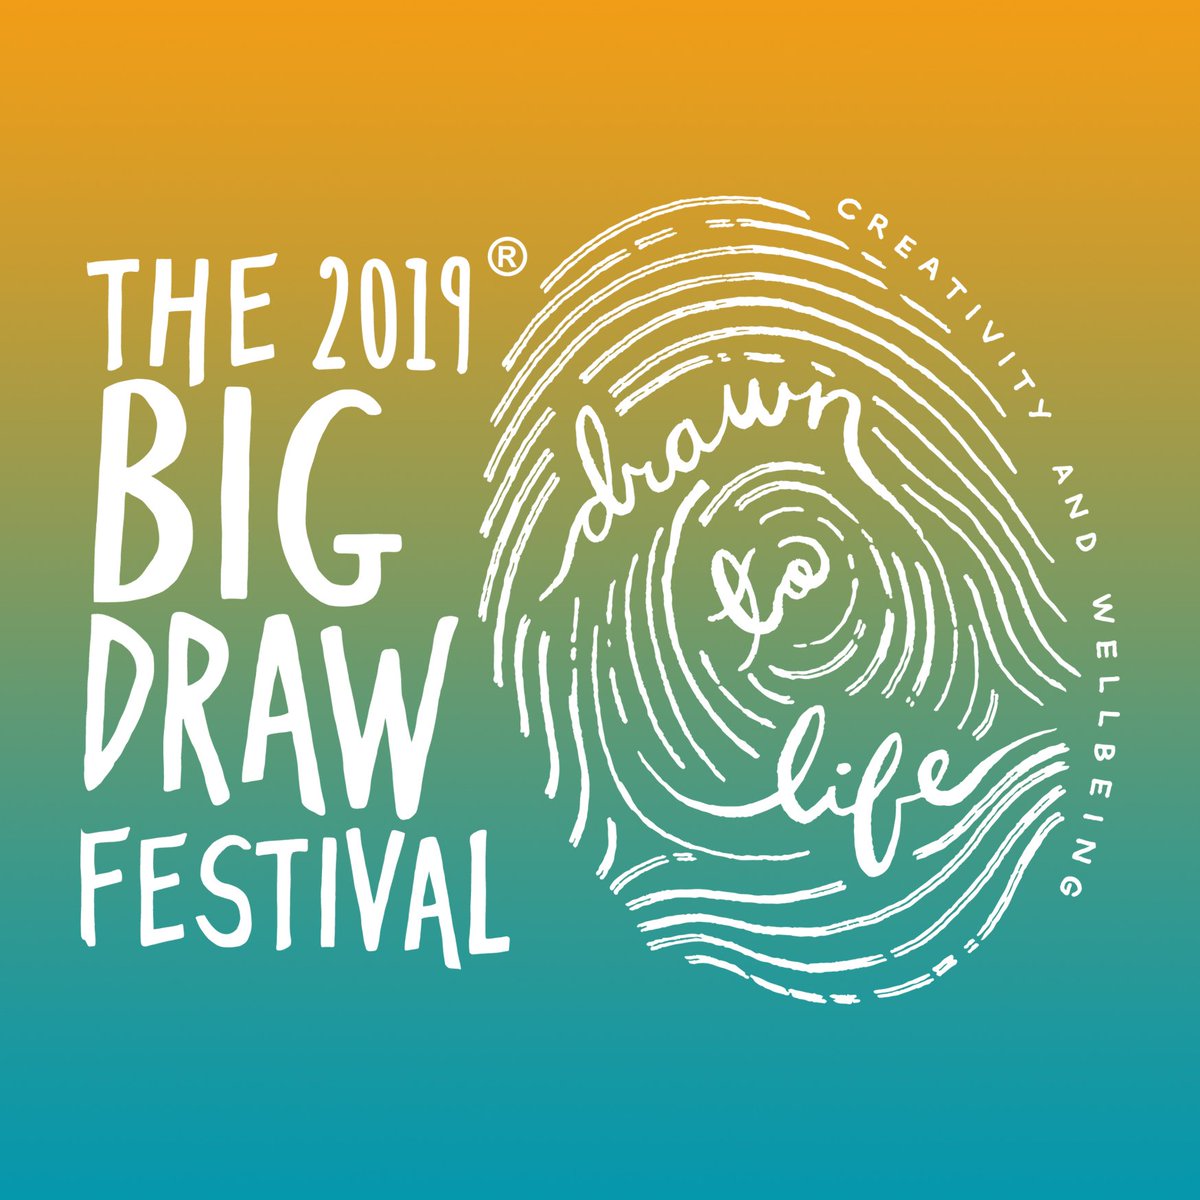 🗓️✏️ Date for #TheBigDraw Diary! #Bollington

THIS SATURDAY discover #GreenSketching, a confidence-boosting approach to sketching nature, in the beautiful countryside surrounding Bollington with #BoggyDoodles 👣✏️☀️🌱 @BridgendCentre #DrawnToLife

bit.ly/2ZpHE39